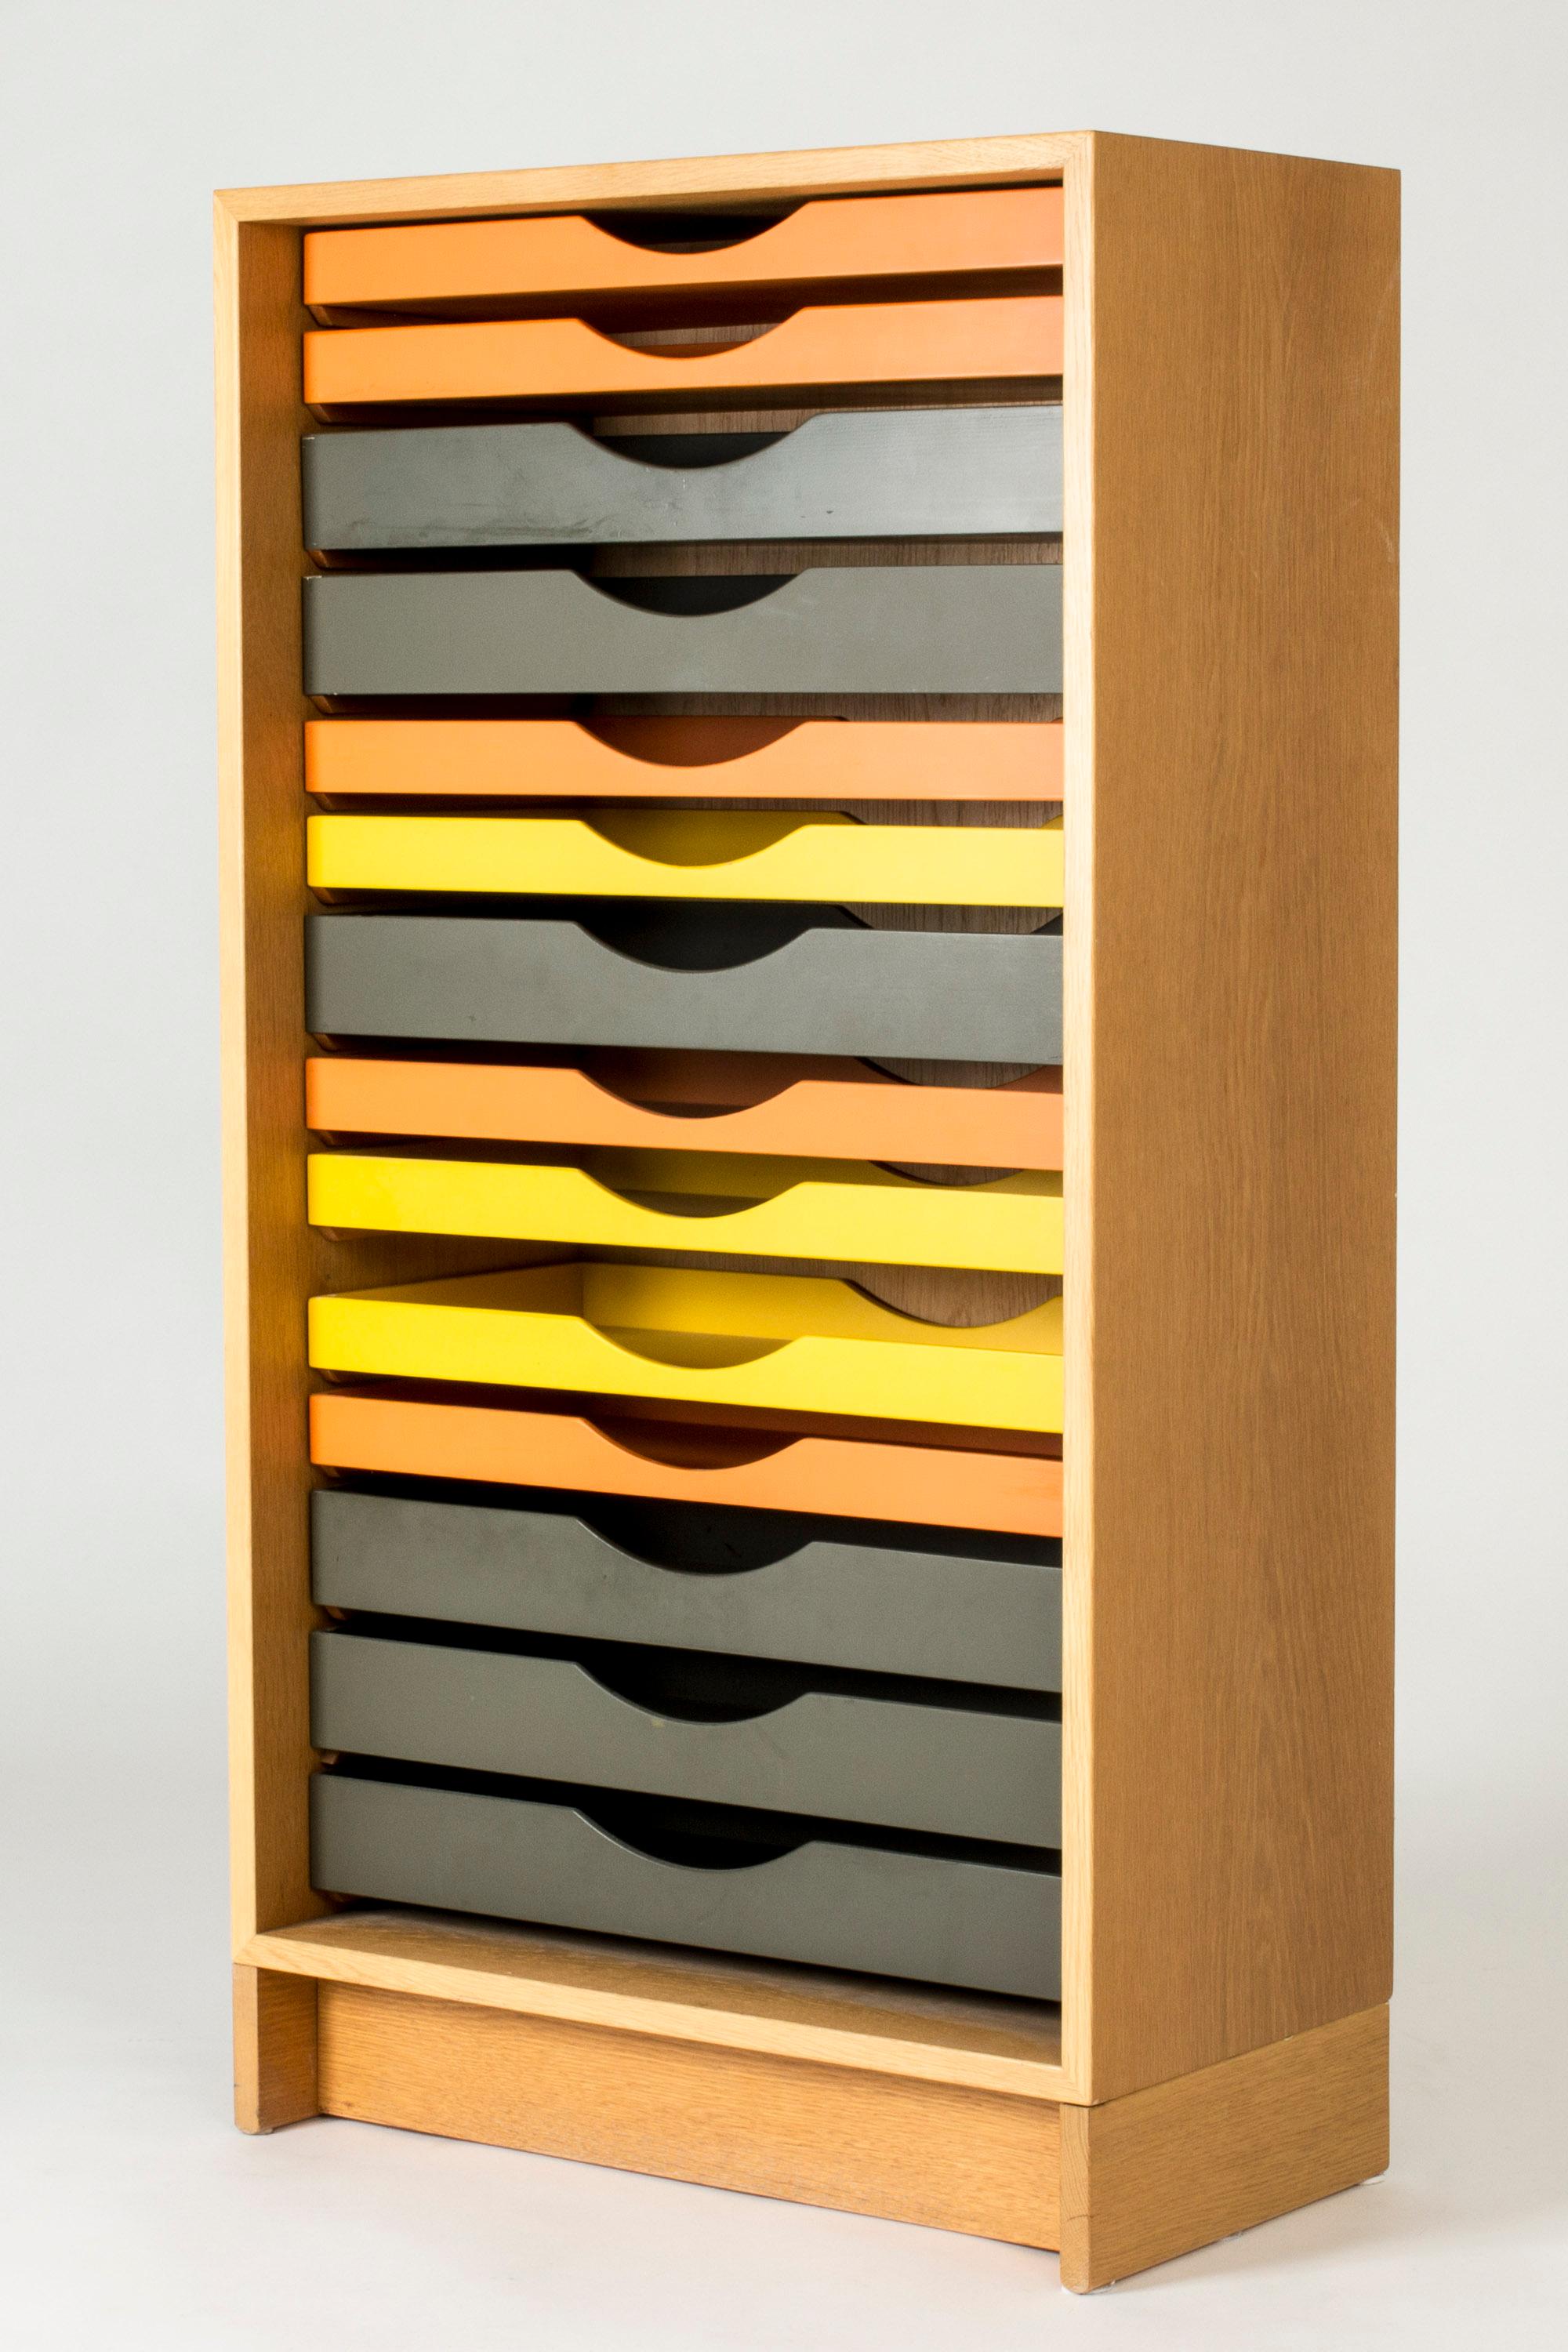 Amazing, colorful filing cabinet by Børge Mogensen, made from oak. Drawers with different heights, lacquered yellow, orange and grey. The drawers can be rearranged.